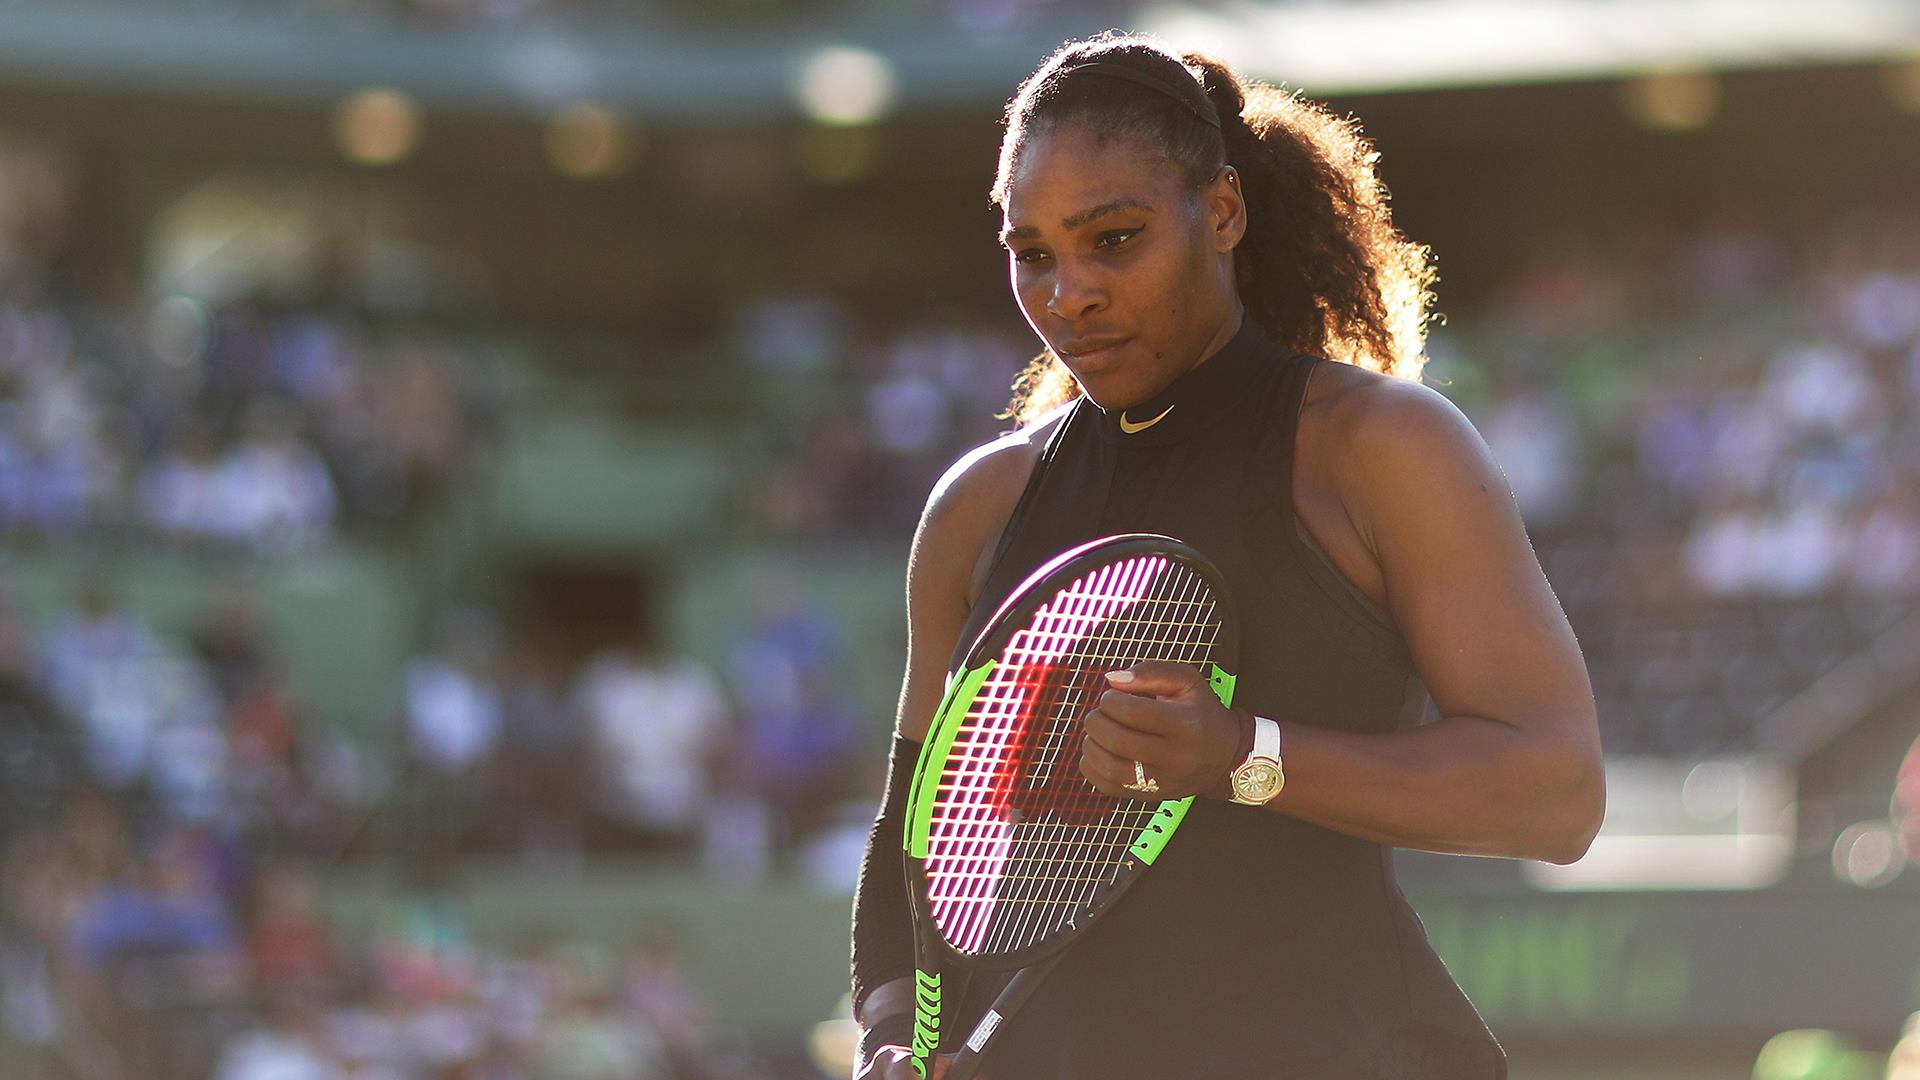 Serena Williams loses ranking at French Open after maternity leave